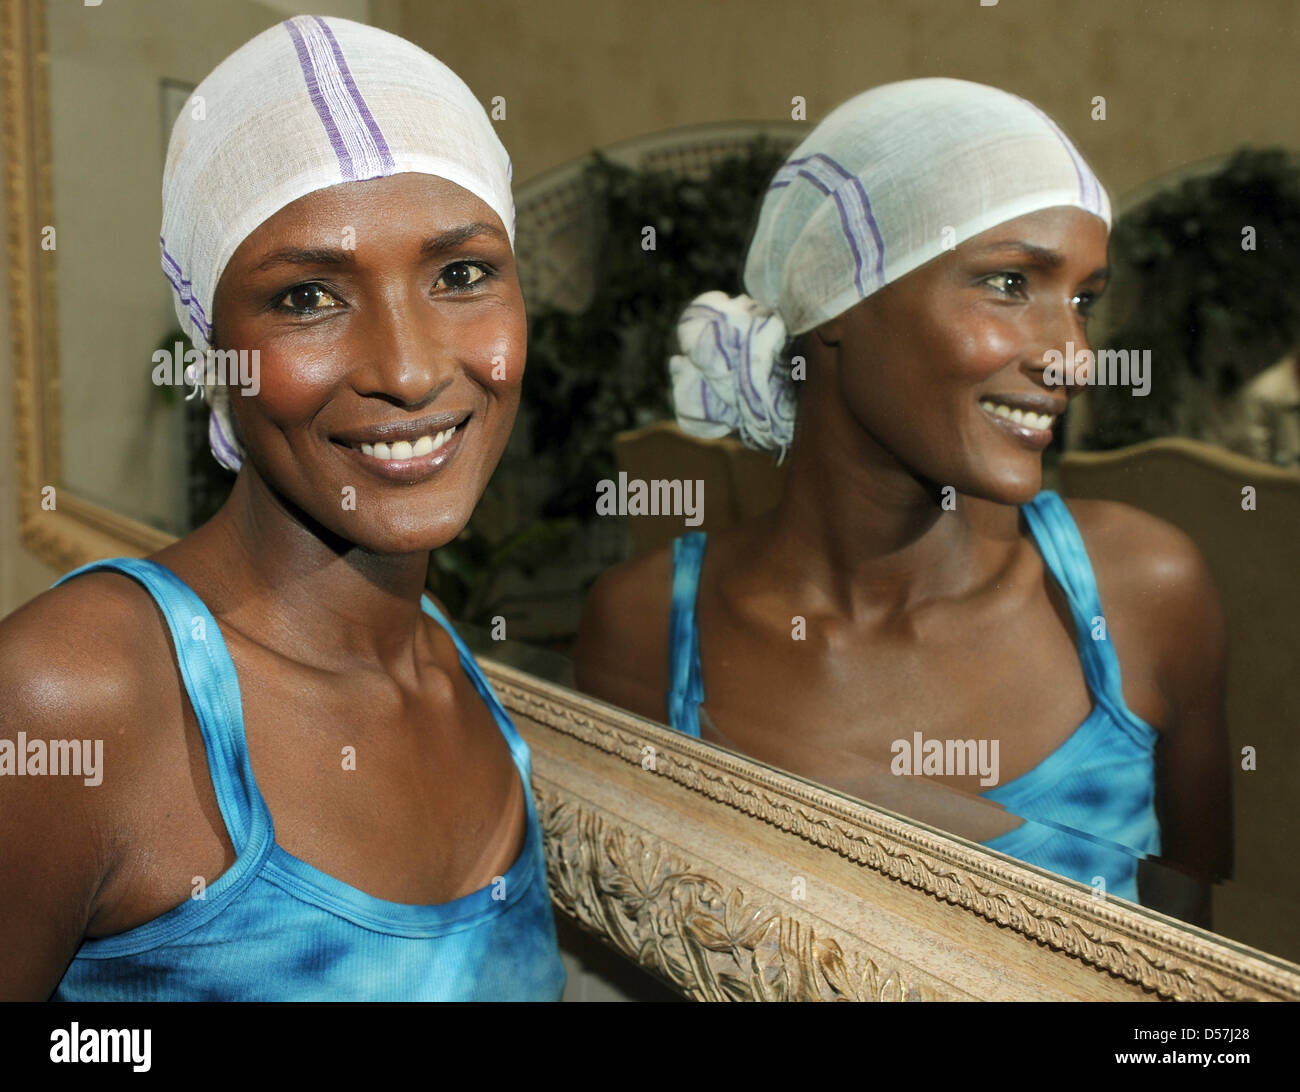 Former model Waris Dirie poses during a press conference for her new book 'Schwarze Frau, weißes Land' ('Black Woman, White Country') at hotel Adlon in Berlin, Germany, 18 May 2010. In the book, Dirie talks about her life in the new, white home and her longing for Africa. Photo: JENS KALAENE Stock Photo